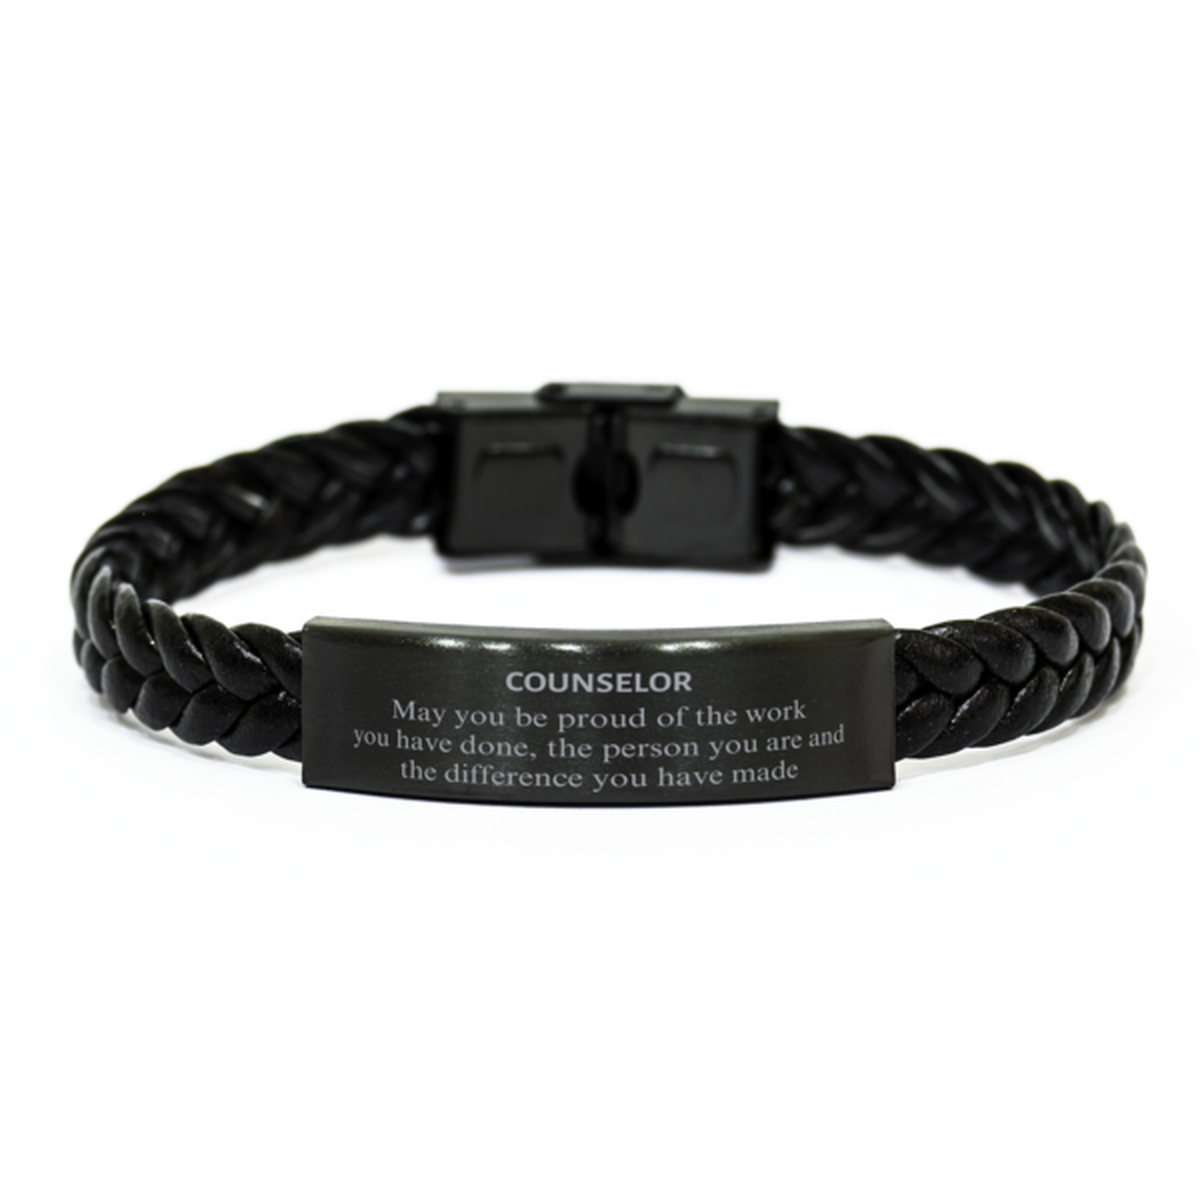 Counselor May you be proud of the work you have done, Retirement Counselor Braided Leather Bracelet for Colleague Appreciation Gifts Amazing for Counselor